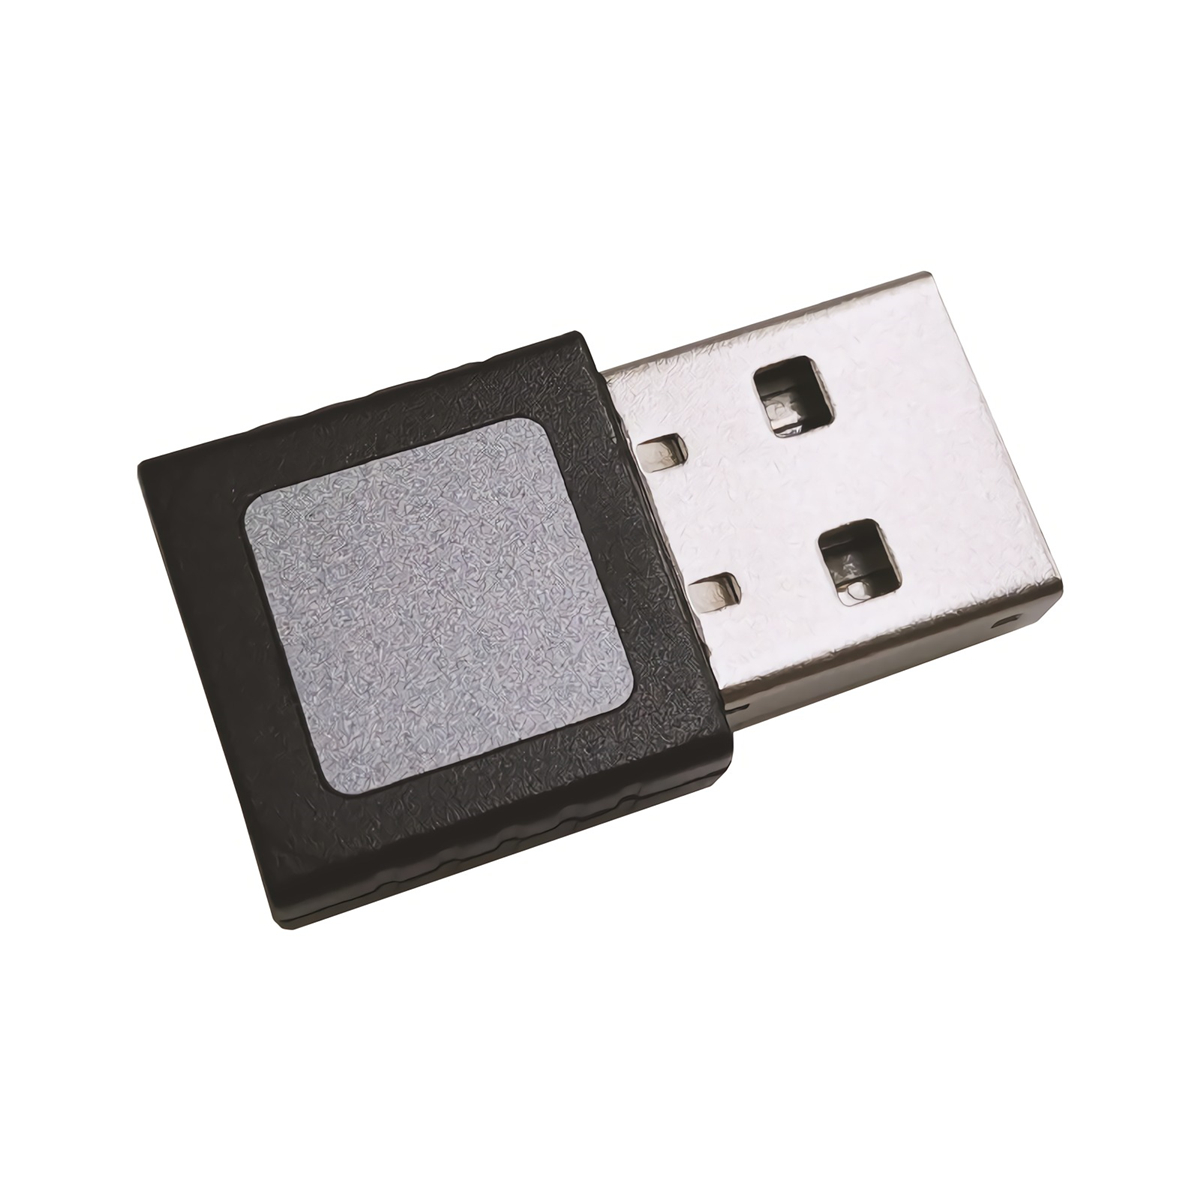 Find USB Fingerprint Recognition Logger Mini USB2.0 Smart ID Fingerprint Reader Fingerprint Unlock 360 Â° Full Angle Identification Adapter For Windows 10 32/64Bit Password-Free Fingerprint Encryption Login Lock for Sale on Gipsybee.com with cryptocurrencies